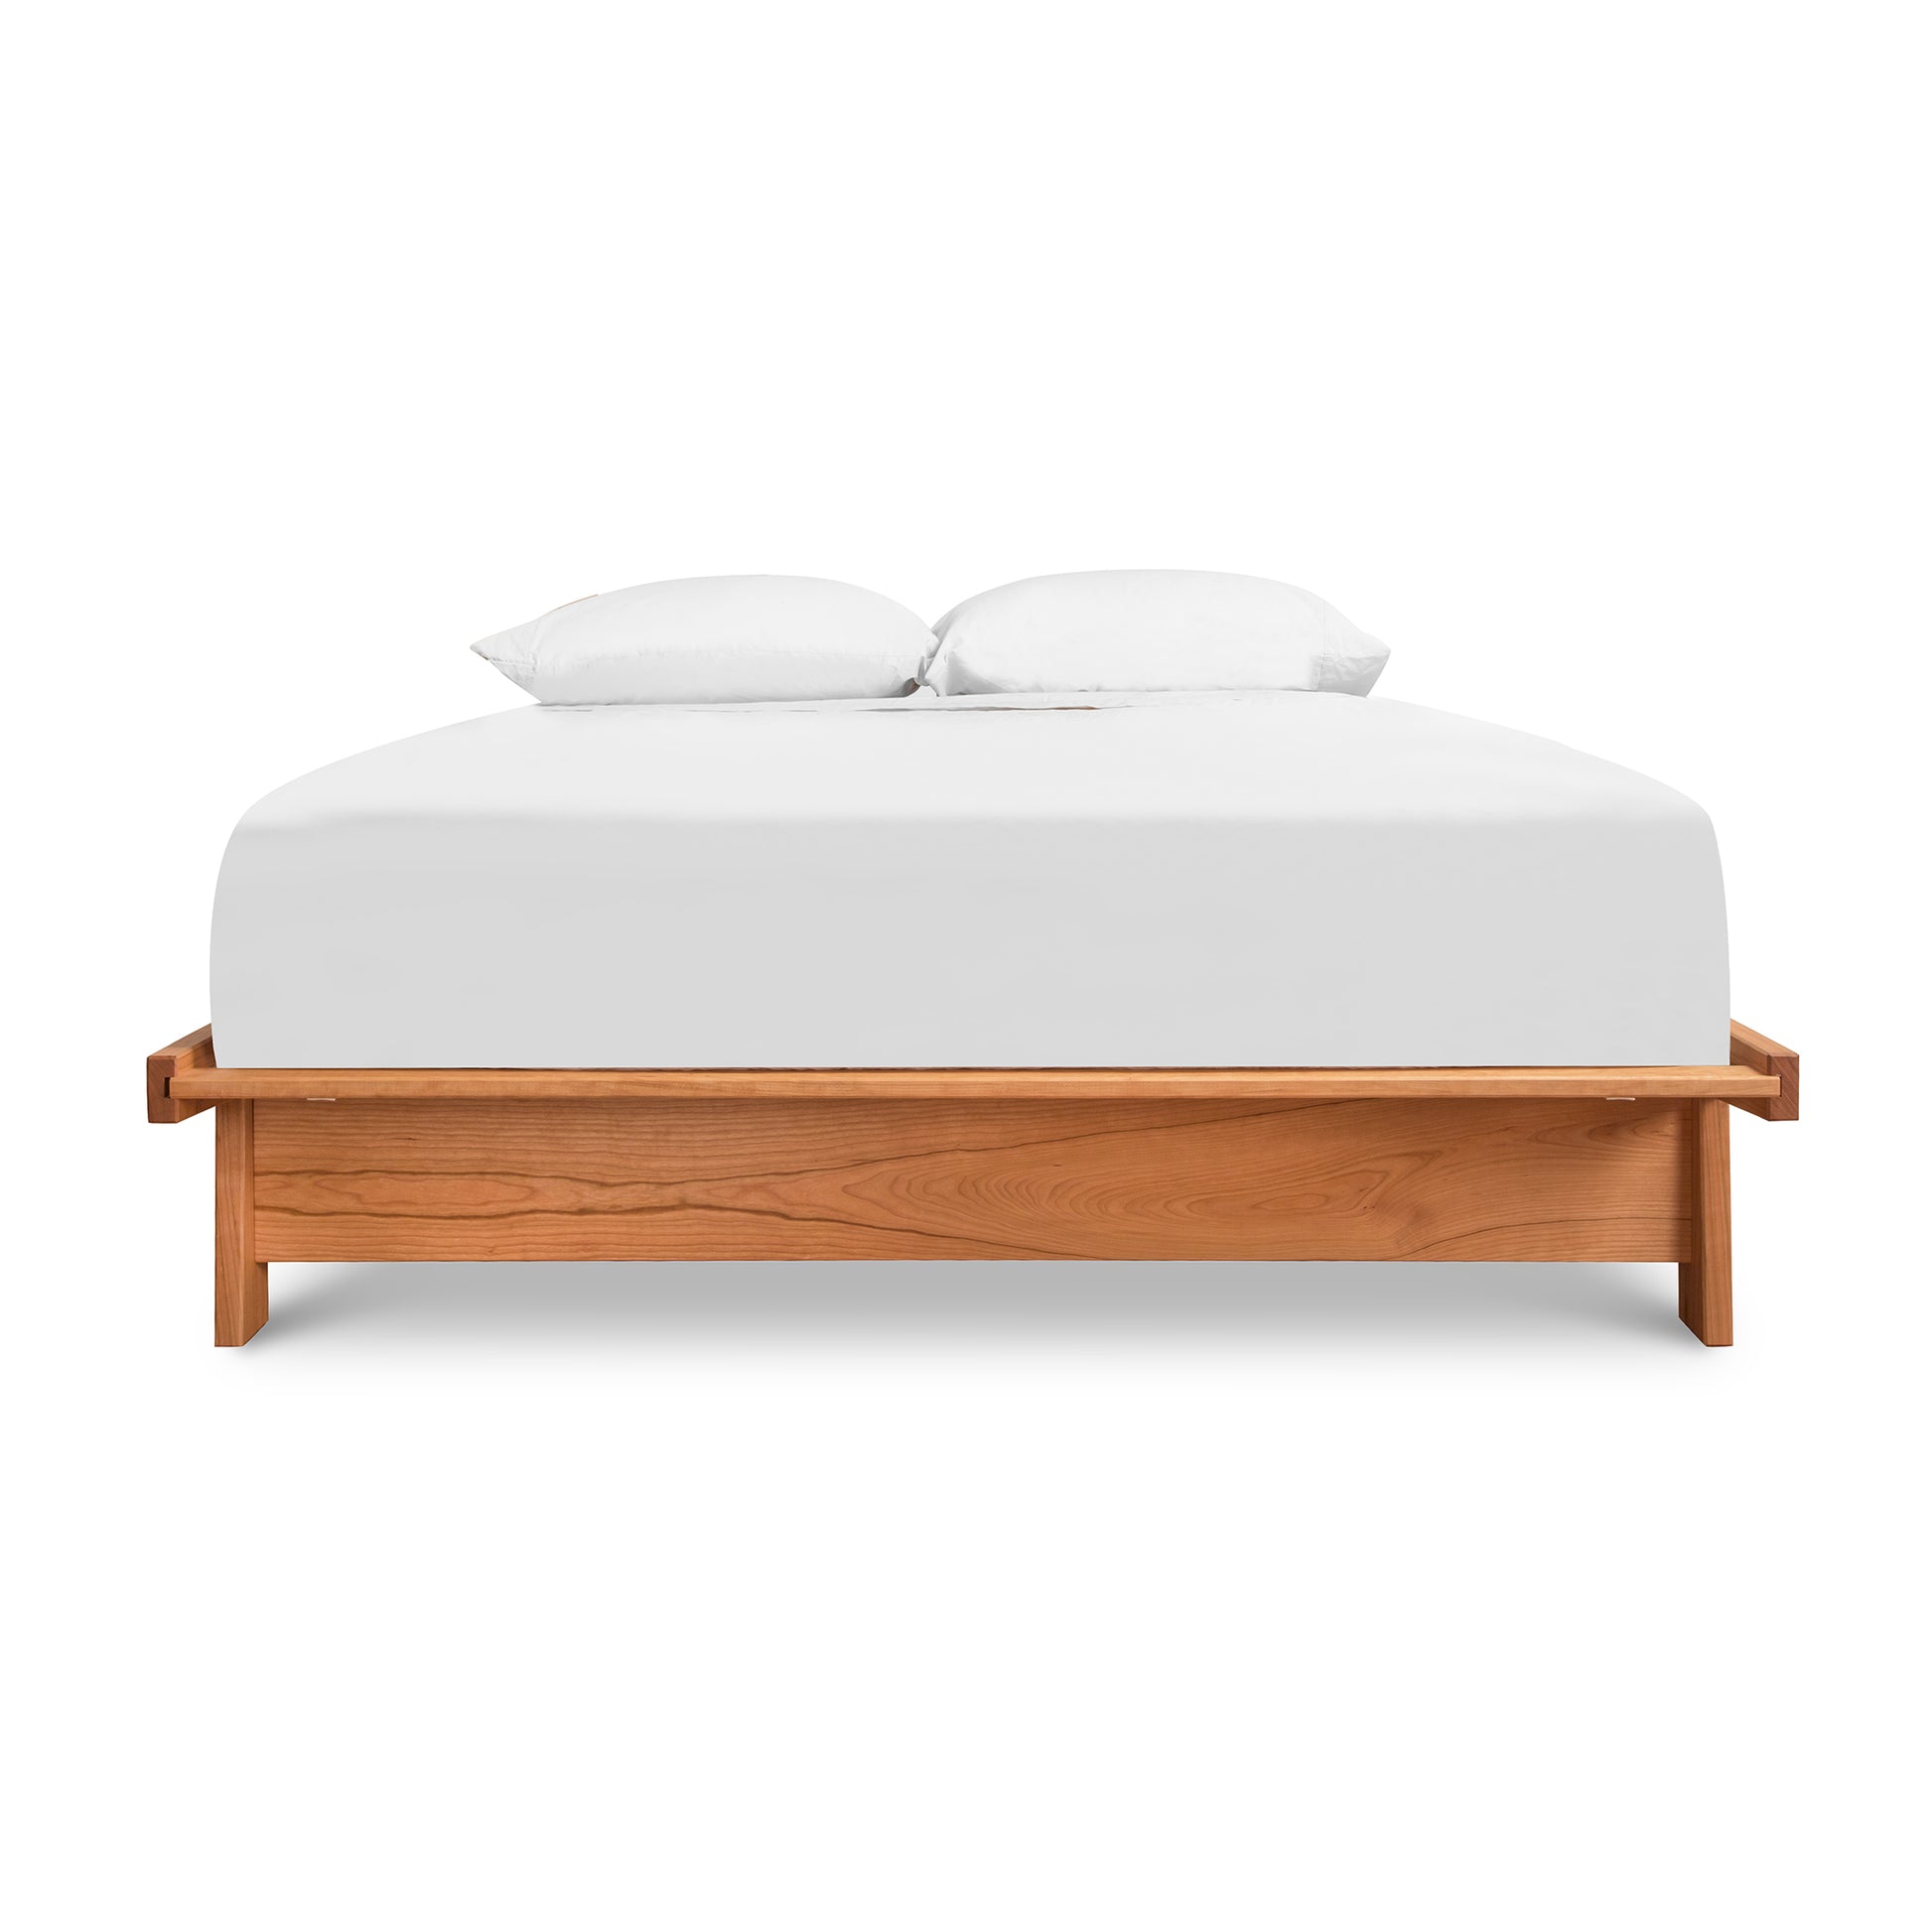 A minimalist Maple Corner Woodworks Cherry Moon Dovetail Platform Bed frame made from solid sustainably harvested woods, with a white mattress and two pillows, isolated on a white background.